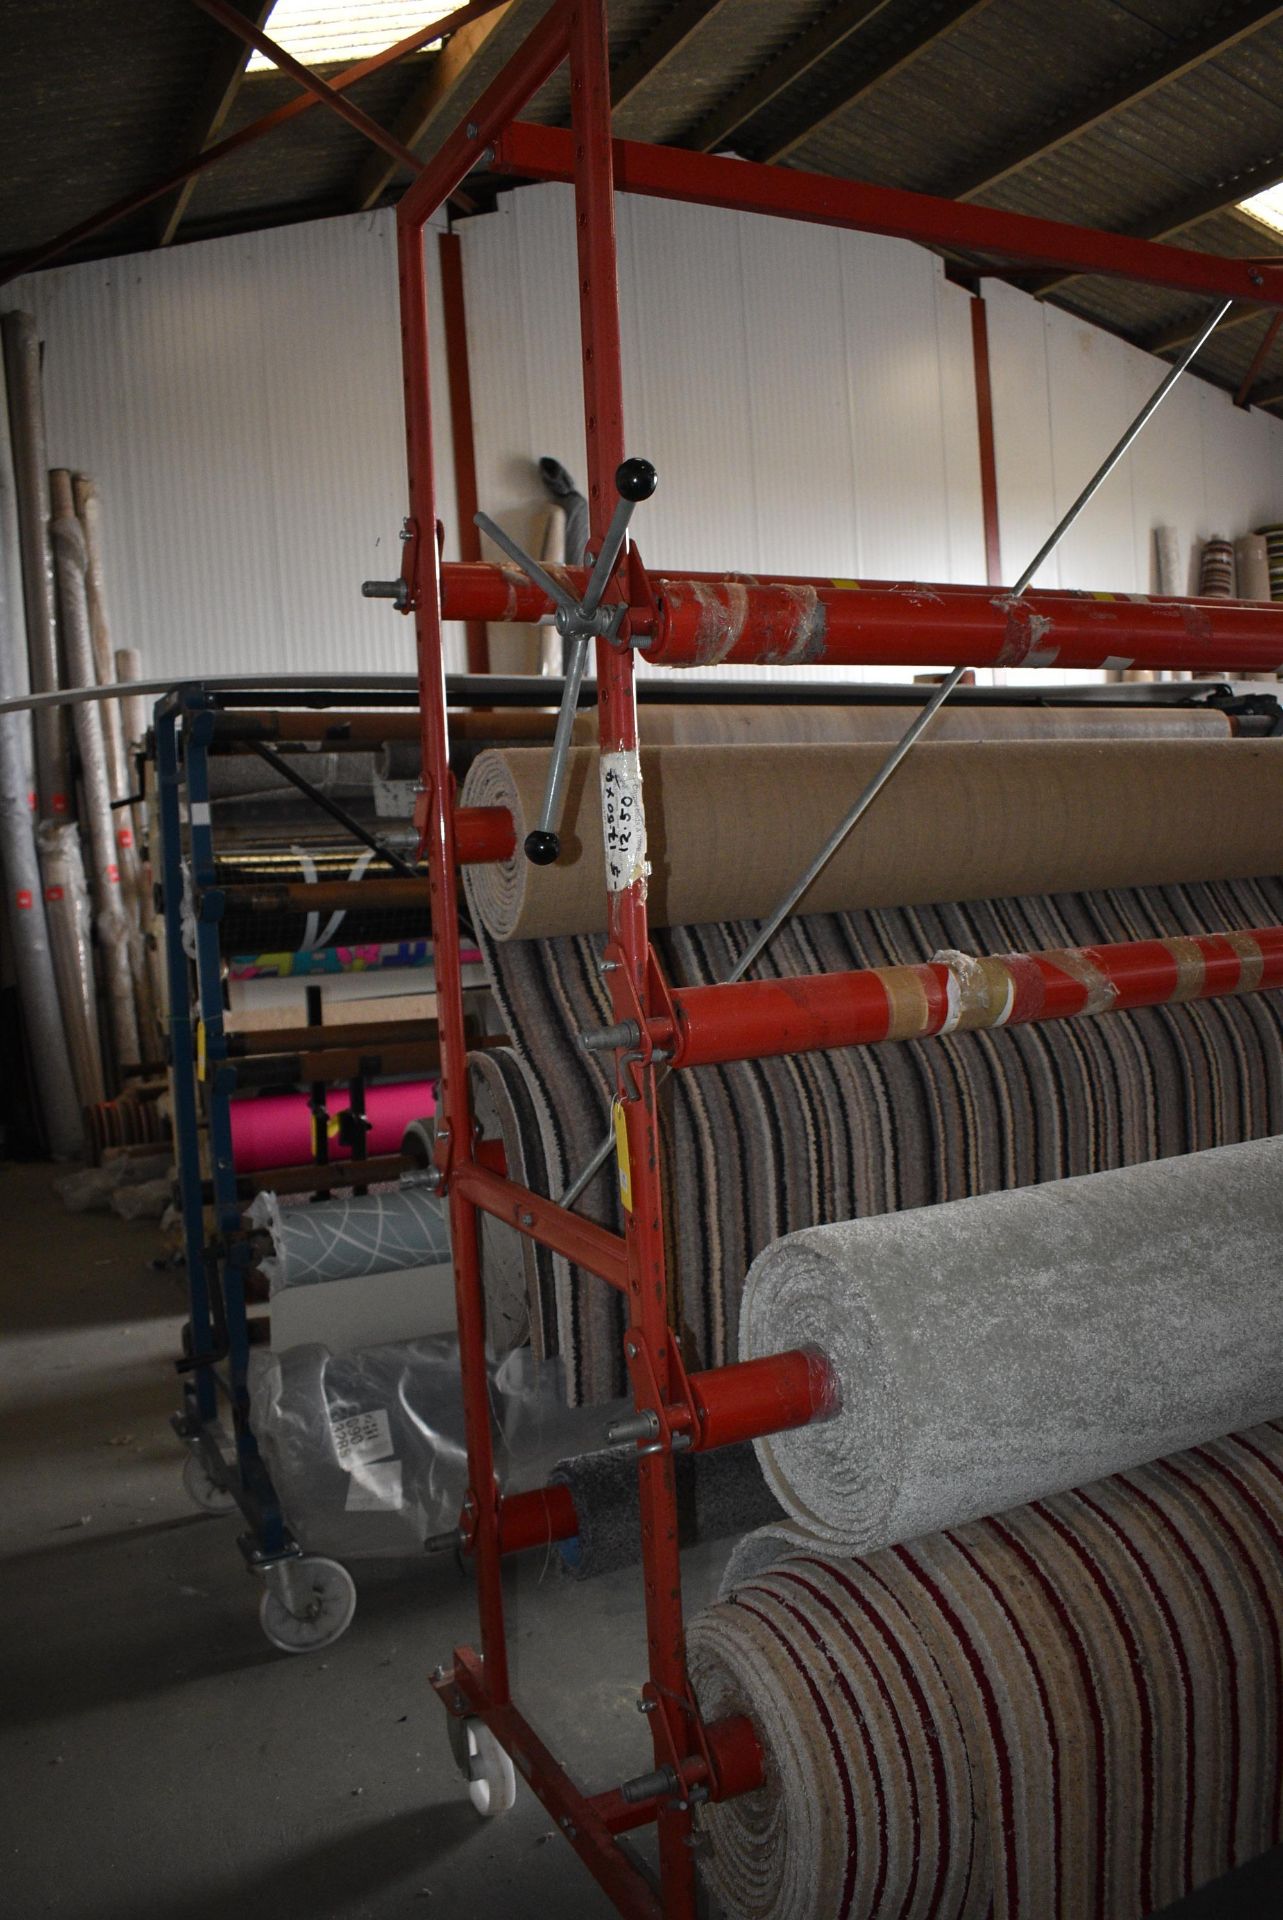 Eight Pole Carpet Rack with Turning Handles, and Castors 4.5m long x 2.2m tall (contents not